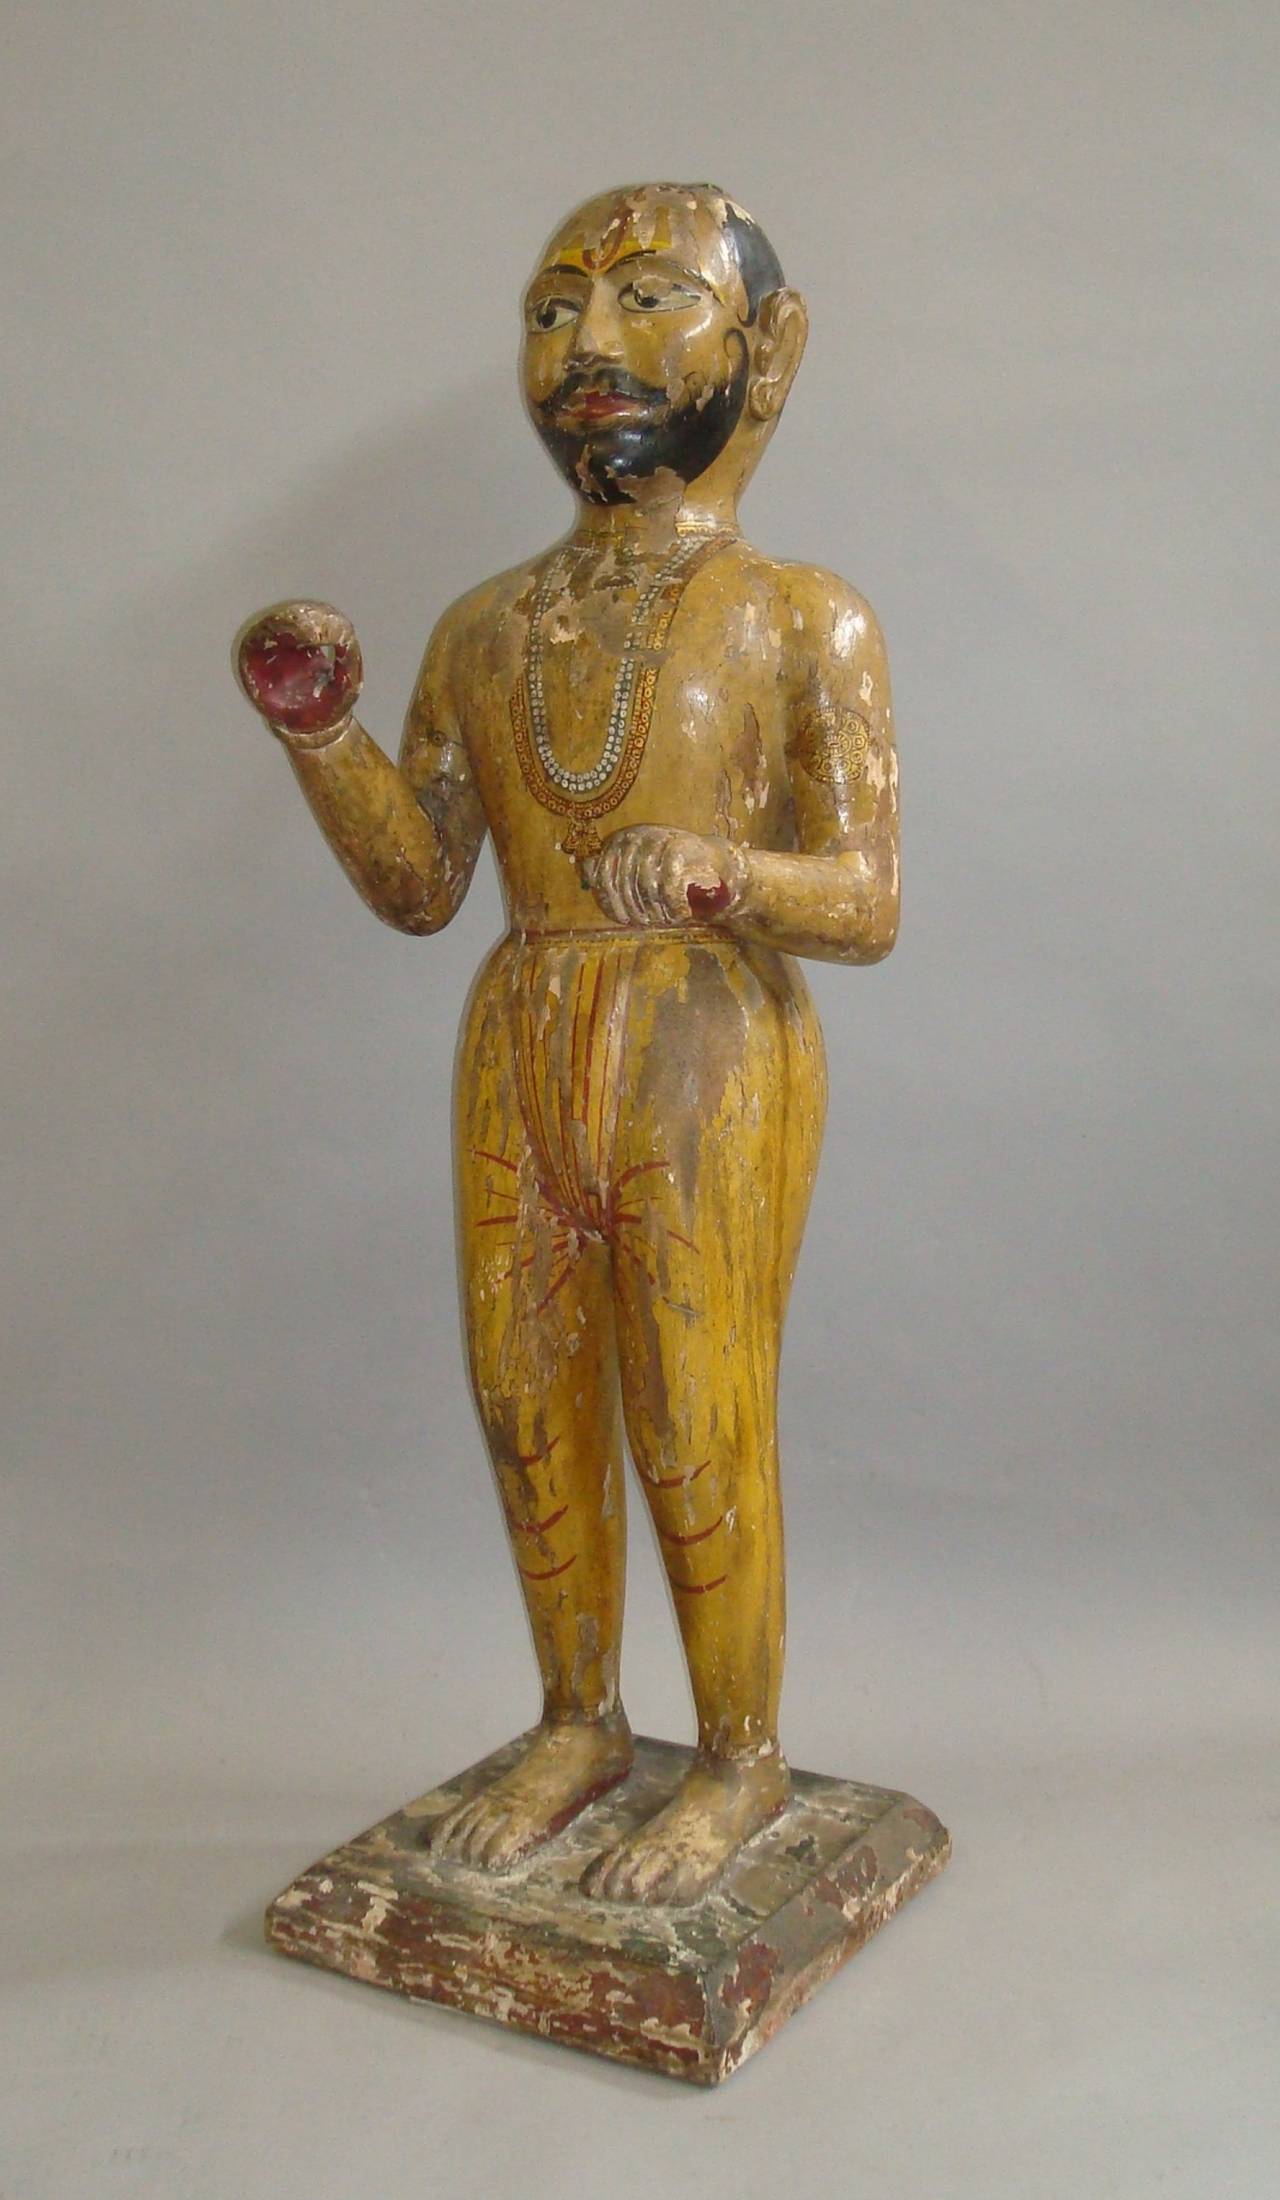 19th Century Carved Indian Figure For Sale 2